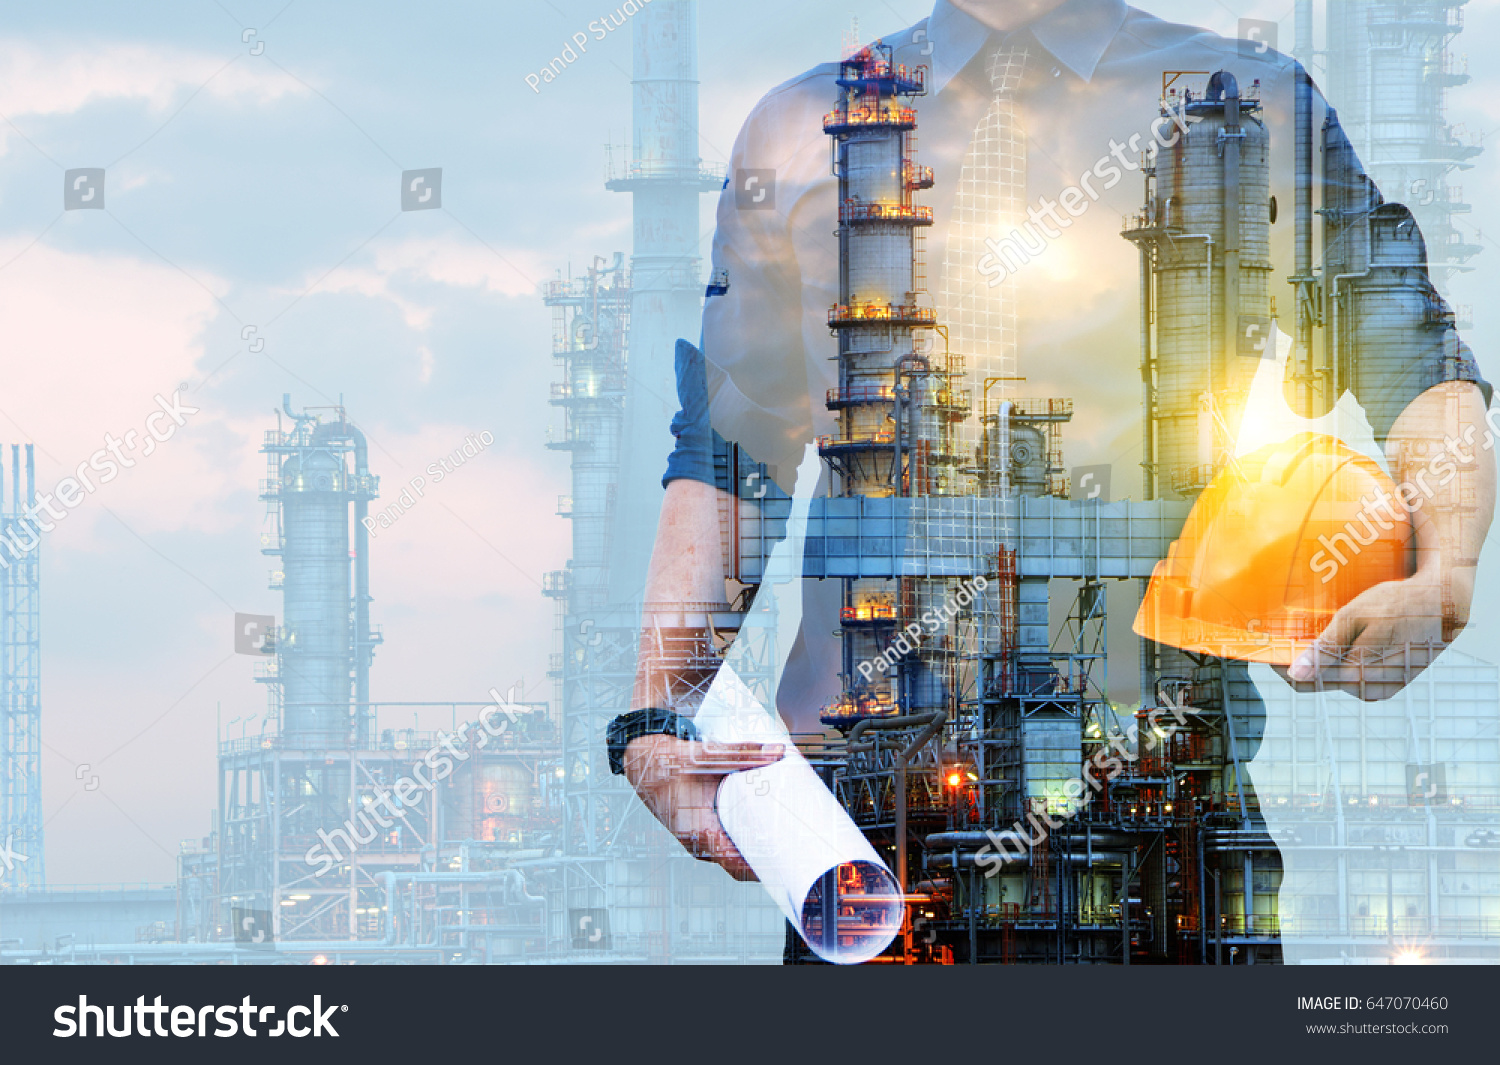 Double exposure of Engineer with safety helmet  with oil refinery industry plant background  #647070460